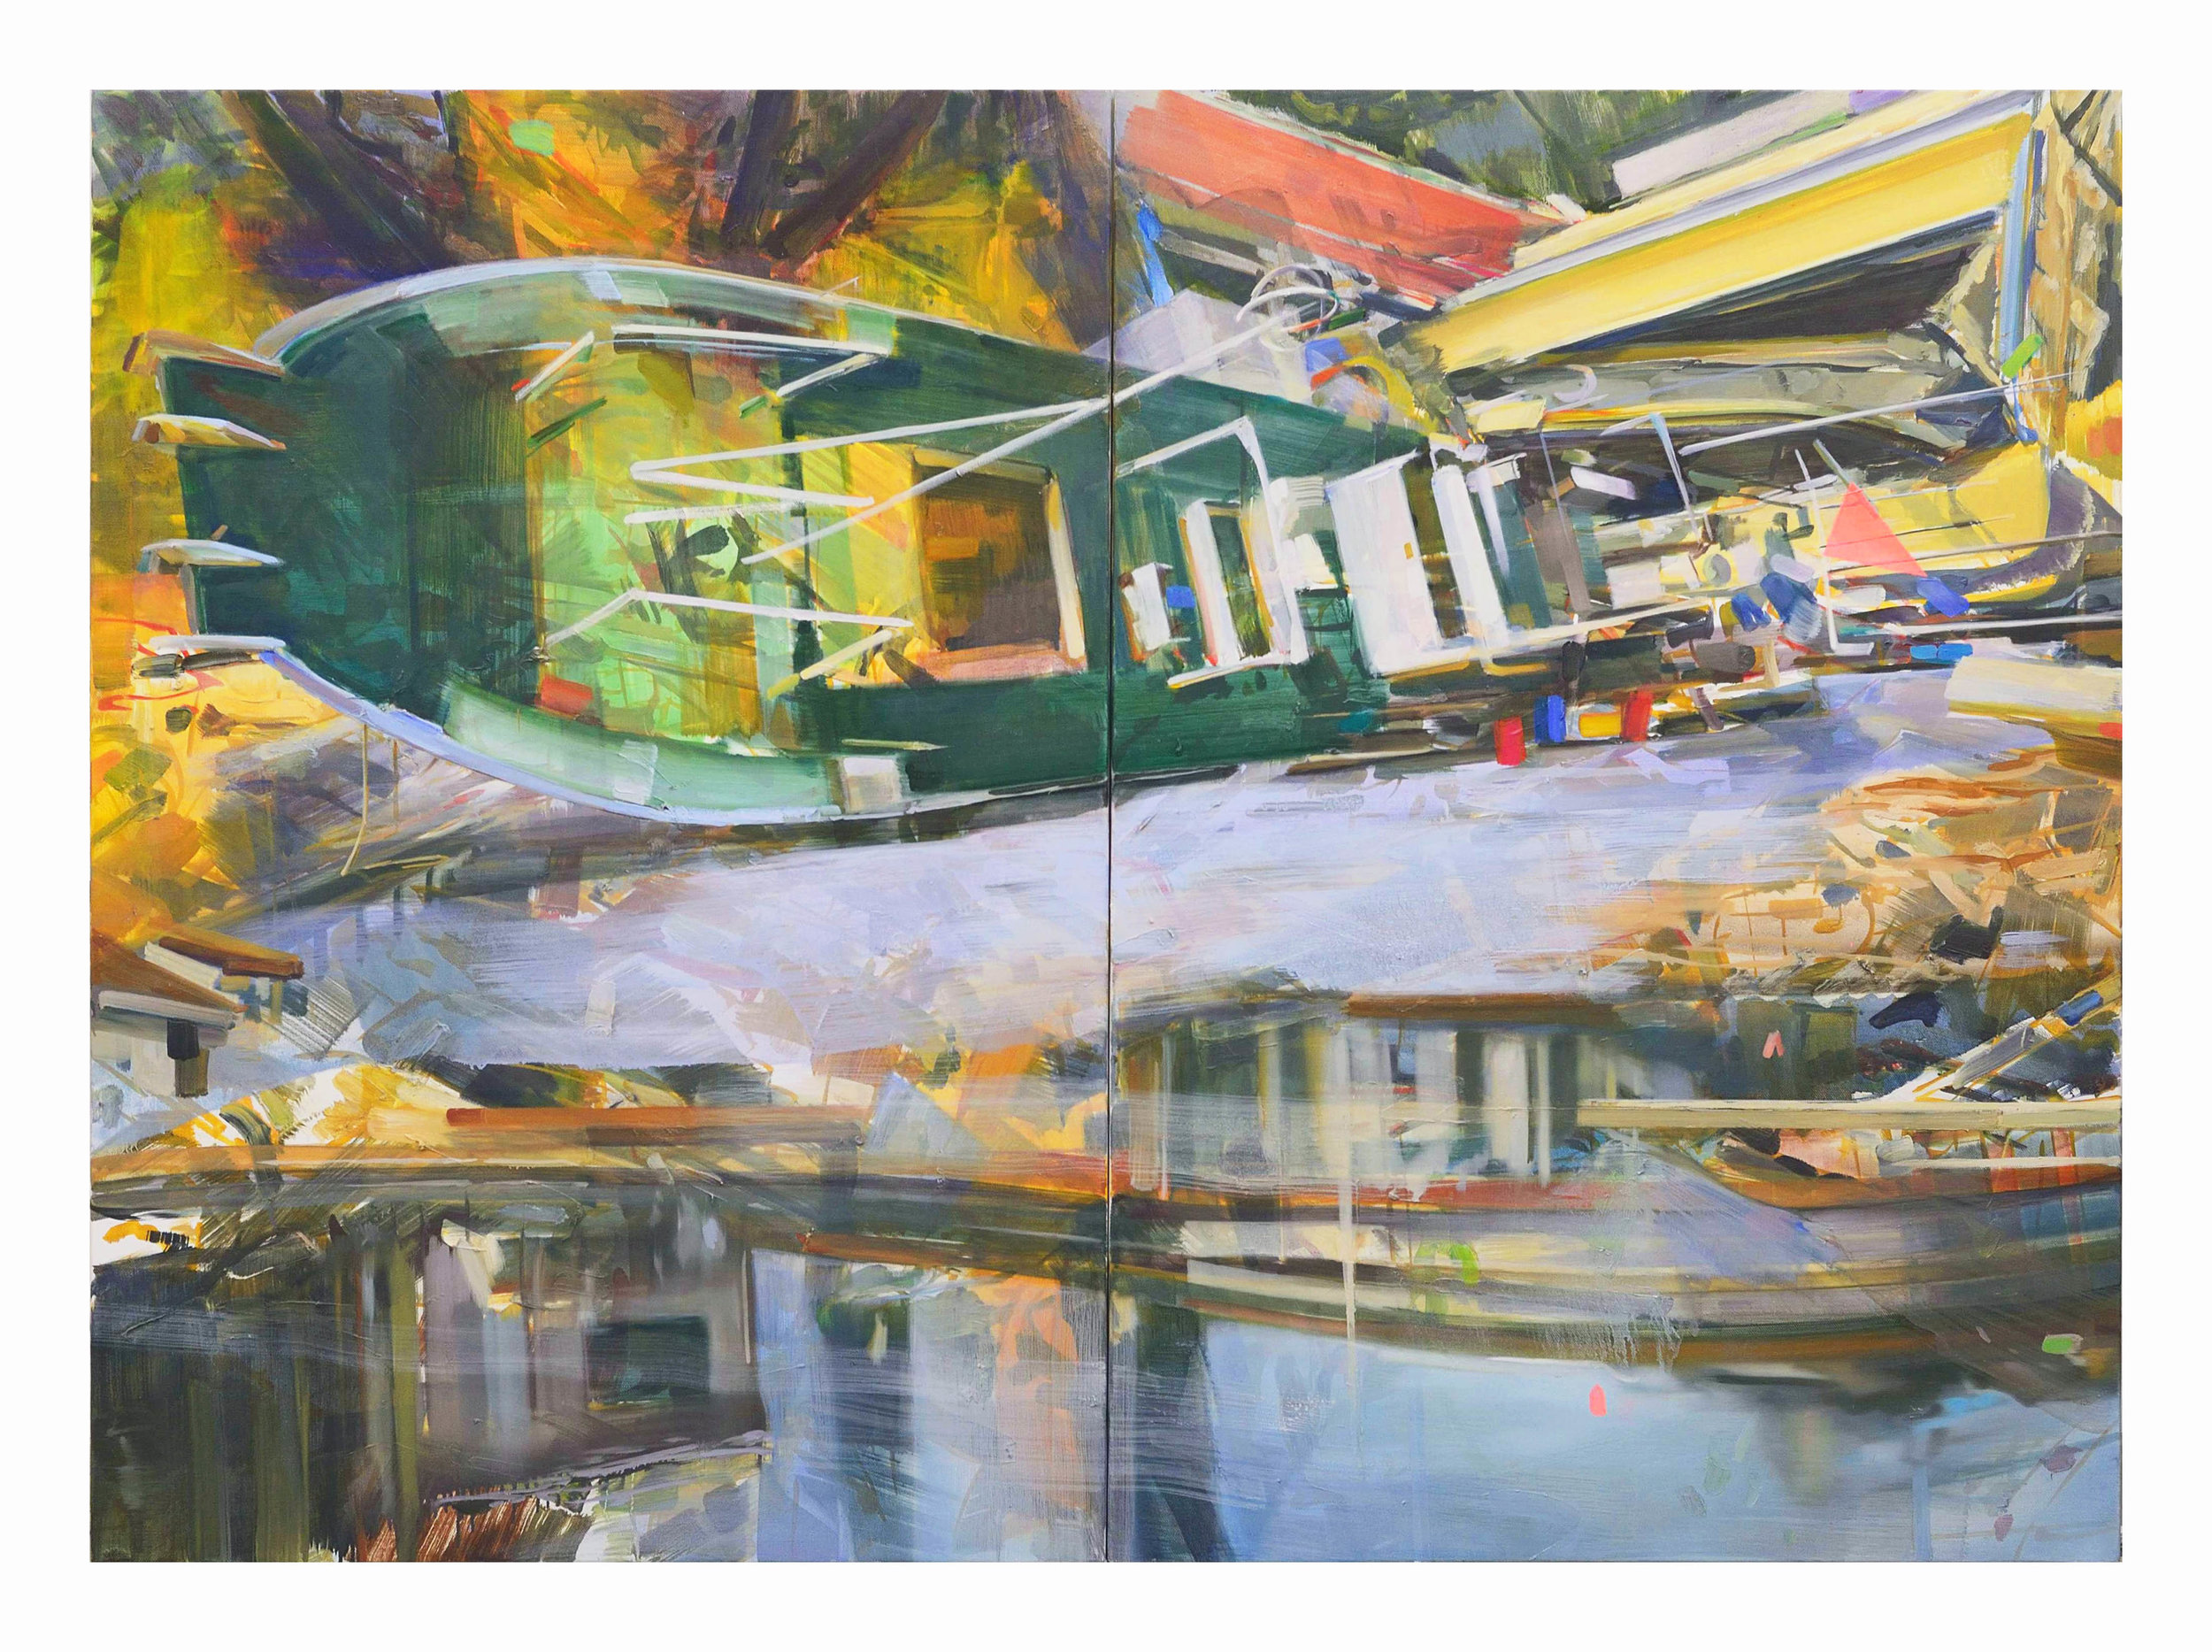   Fitzcaraldo , 2011, oil on canvas, 130 x 178cm (diptych). Private collection, Switzerland 